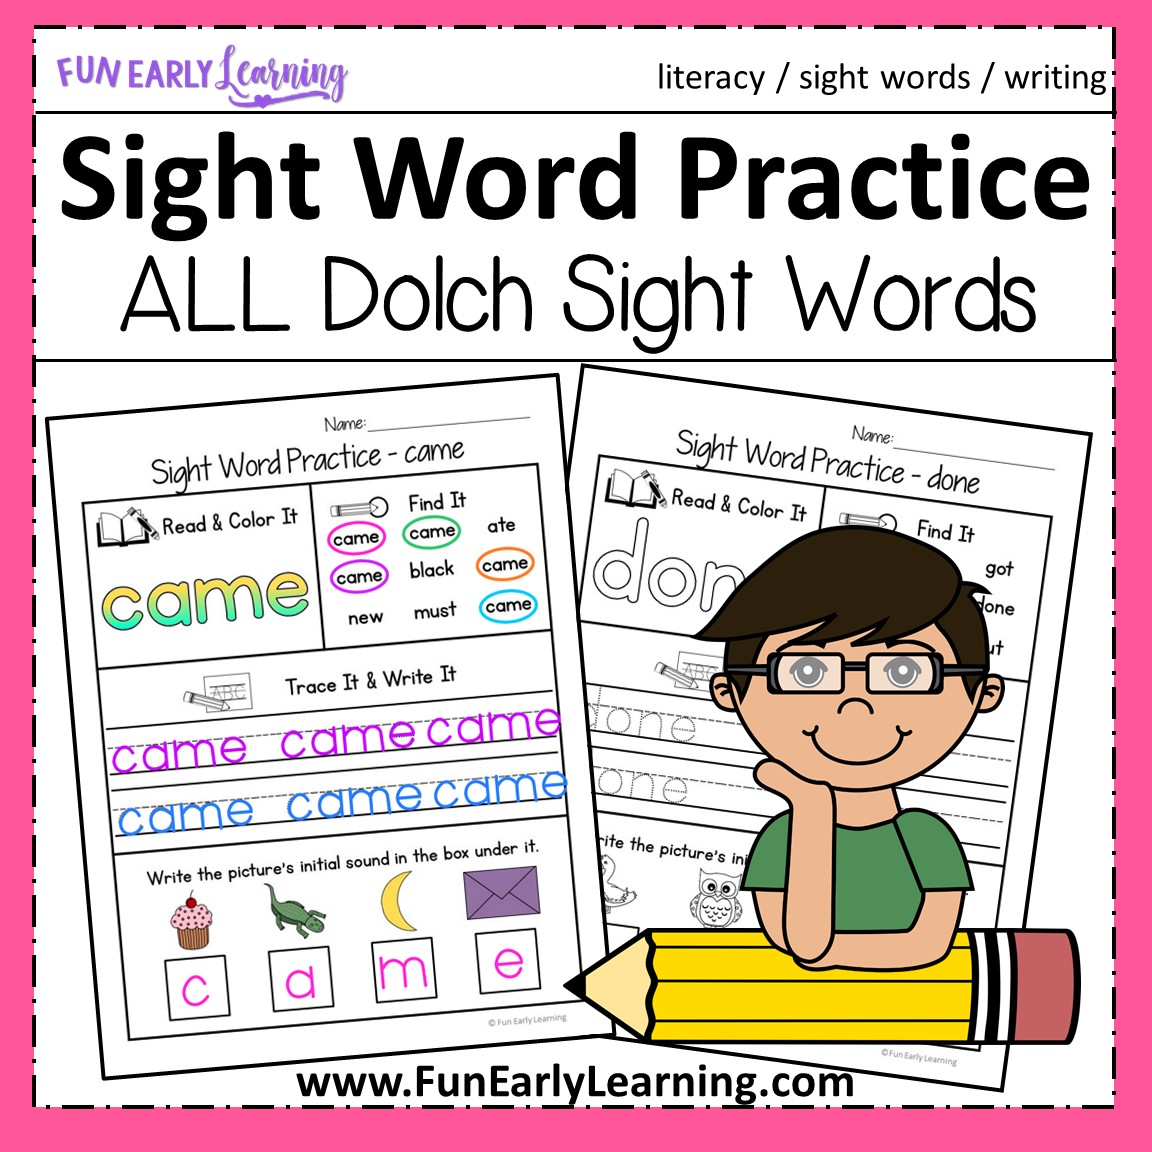 dolch-sight-word-practice-for-presk-kinder-first-second-third-grade